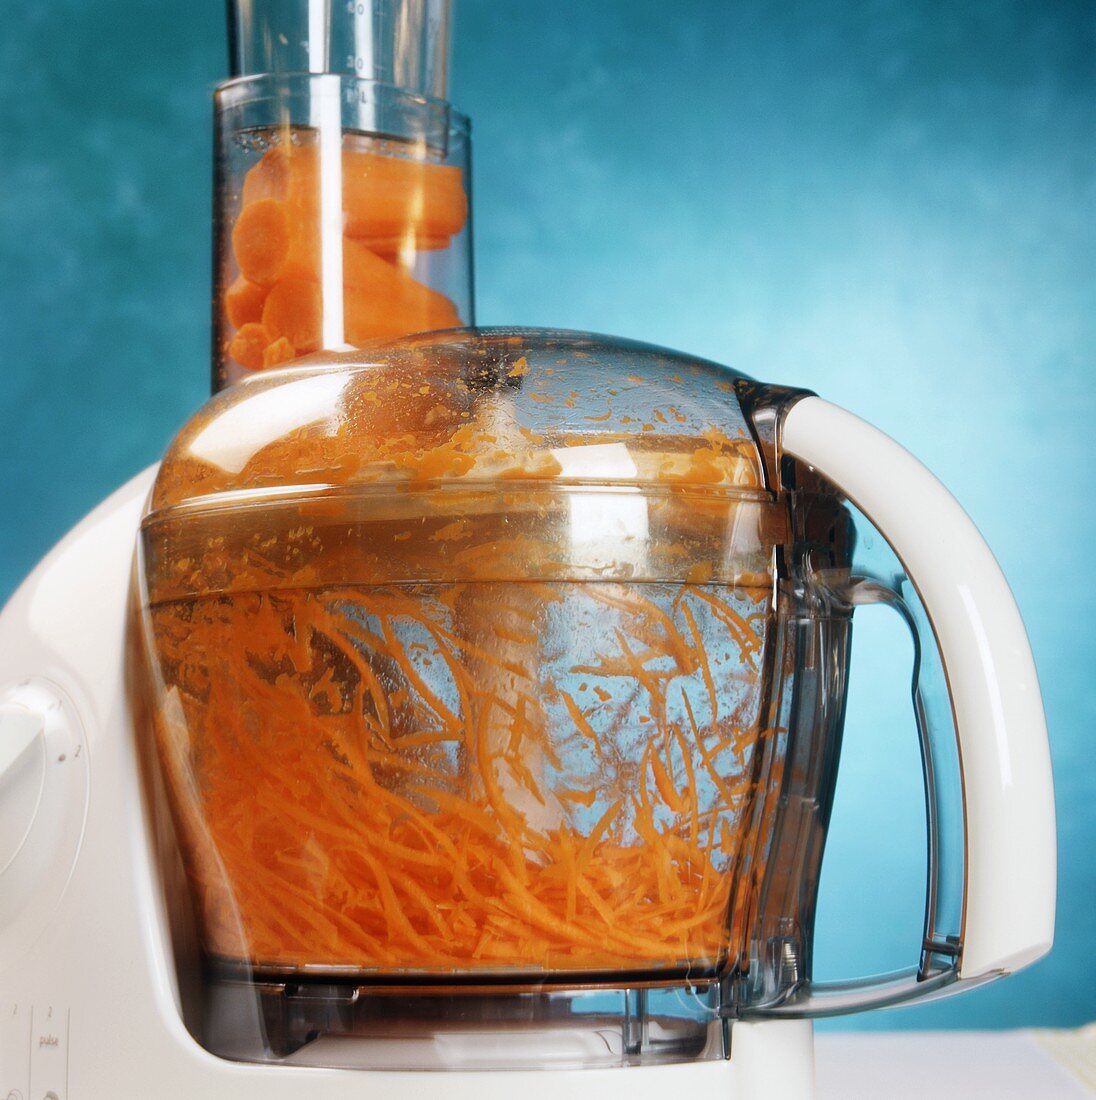 Pureeing Carrots in a Food Processor